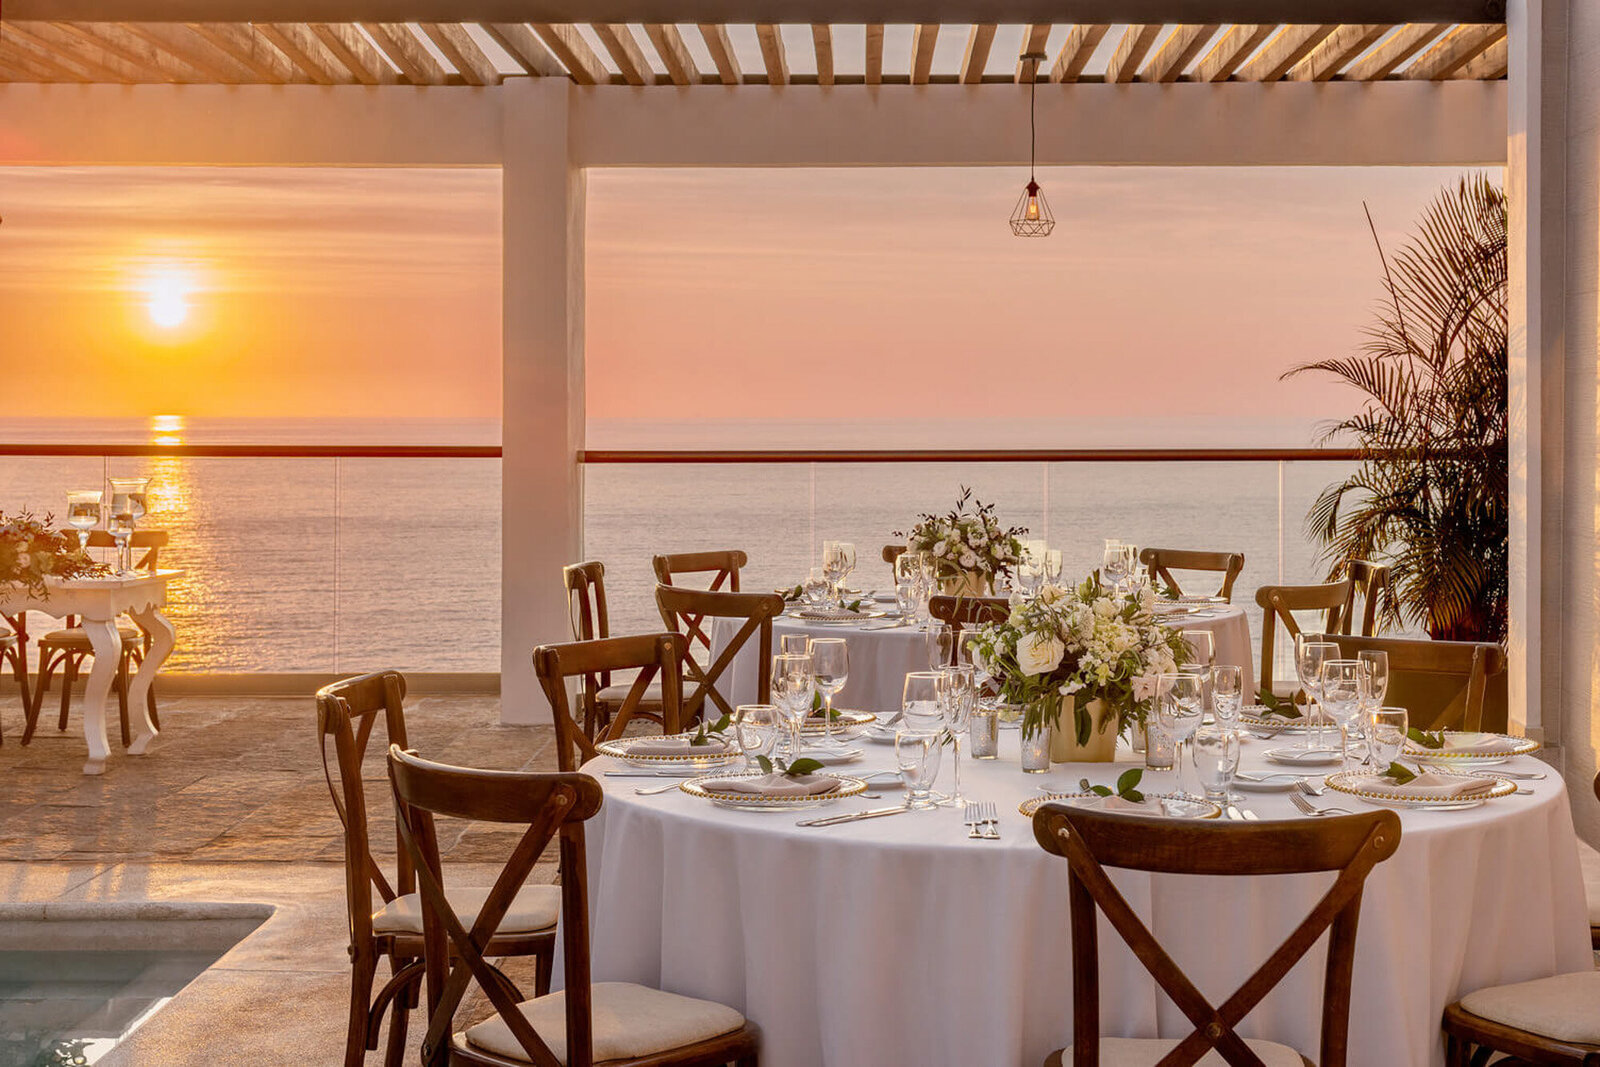 Dining table at a resort while overlooking sunset